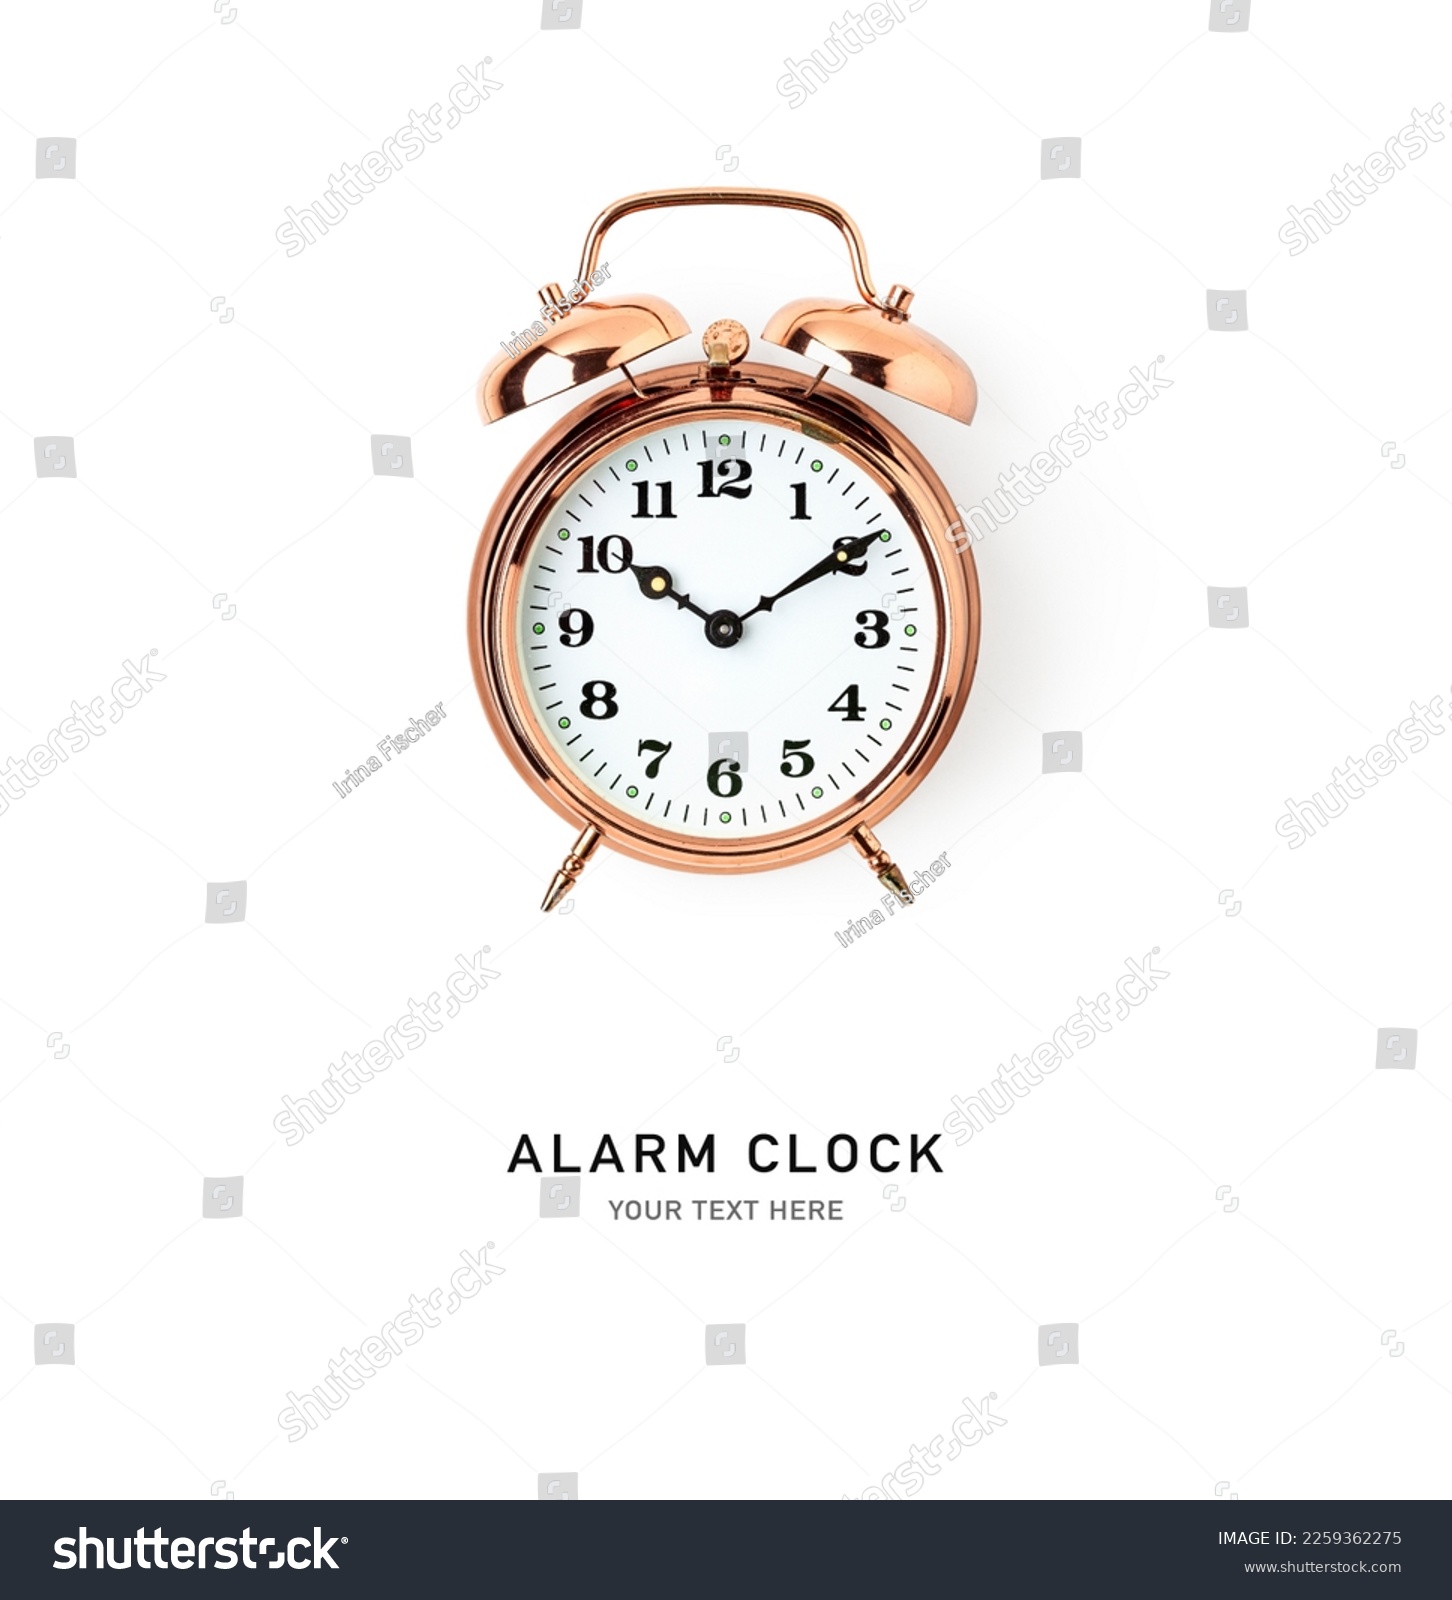 Vintage copper alarm clock. Single object isolated on white background. Creative layout. Design element. Flat lay, top view
 #2259362275